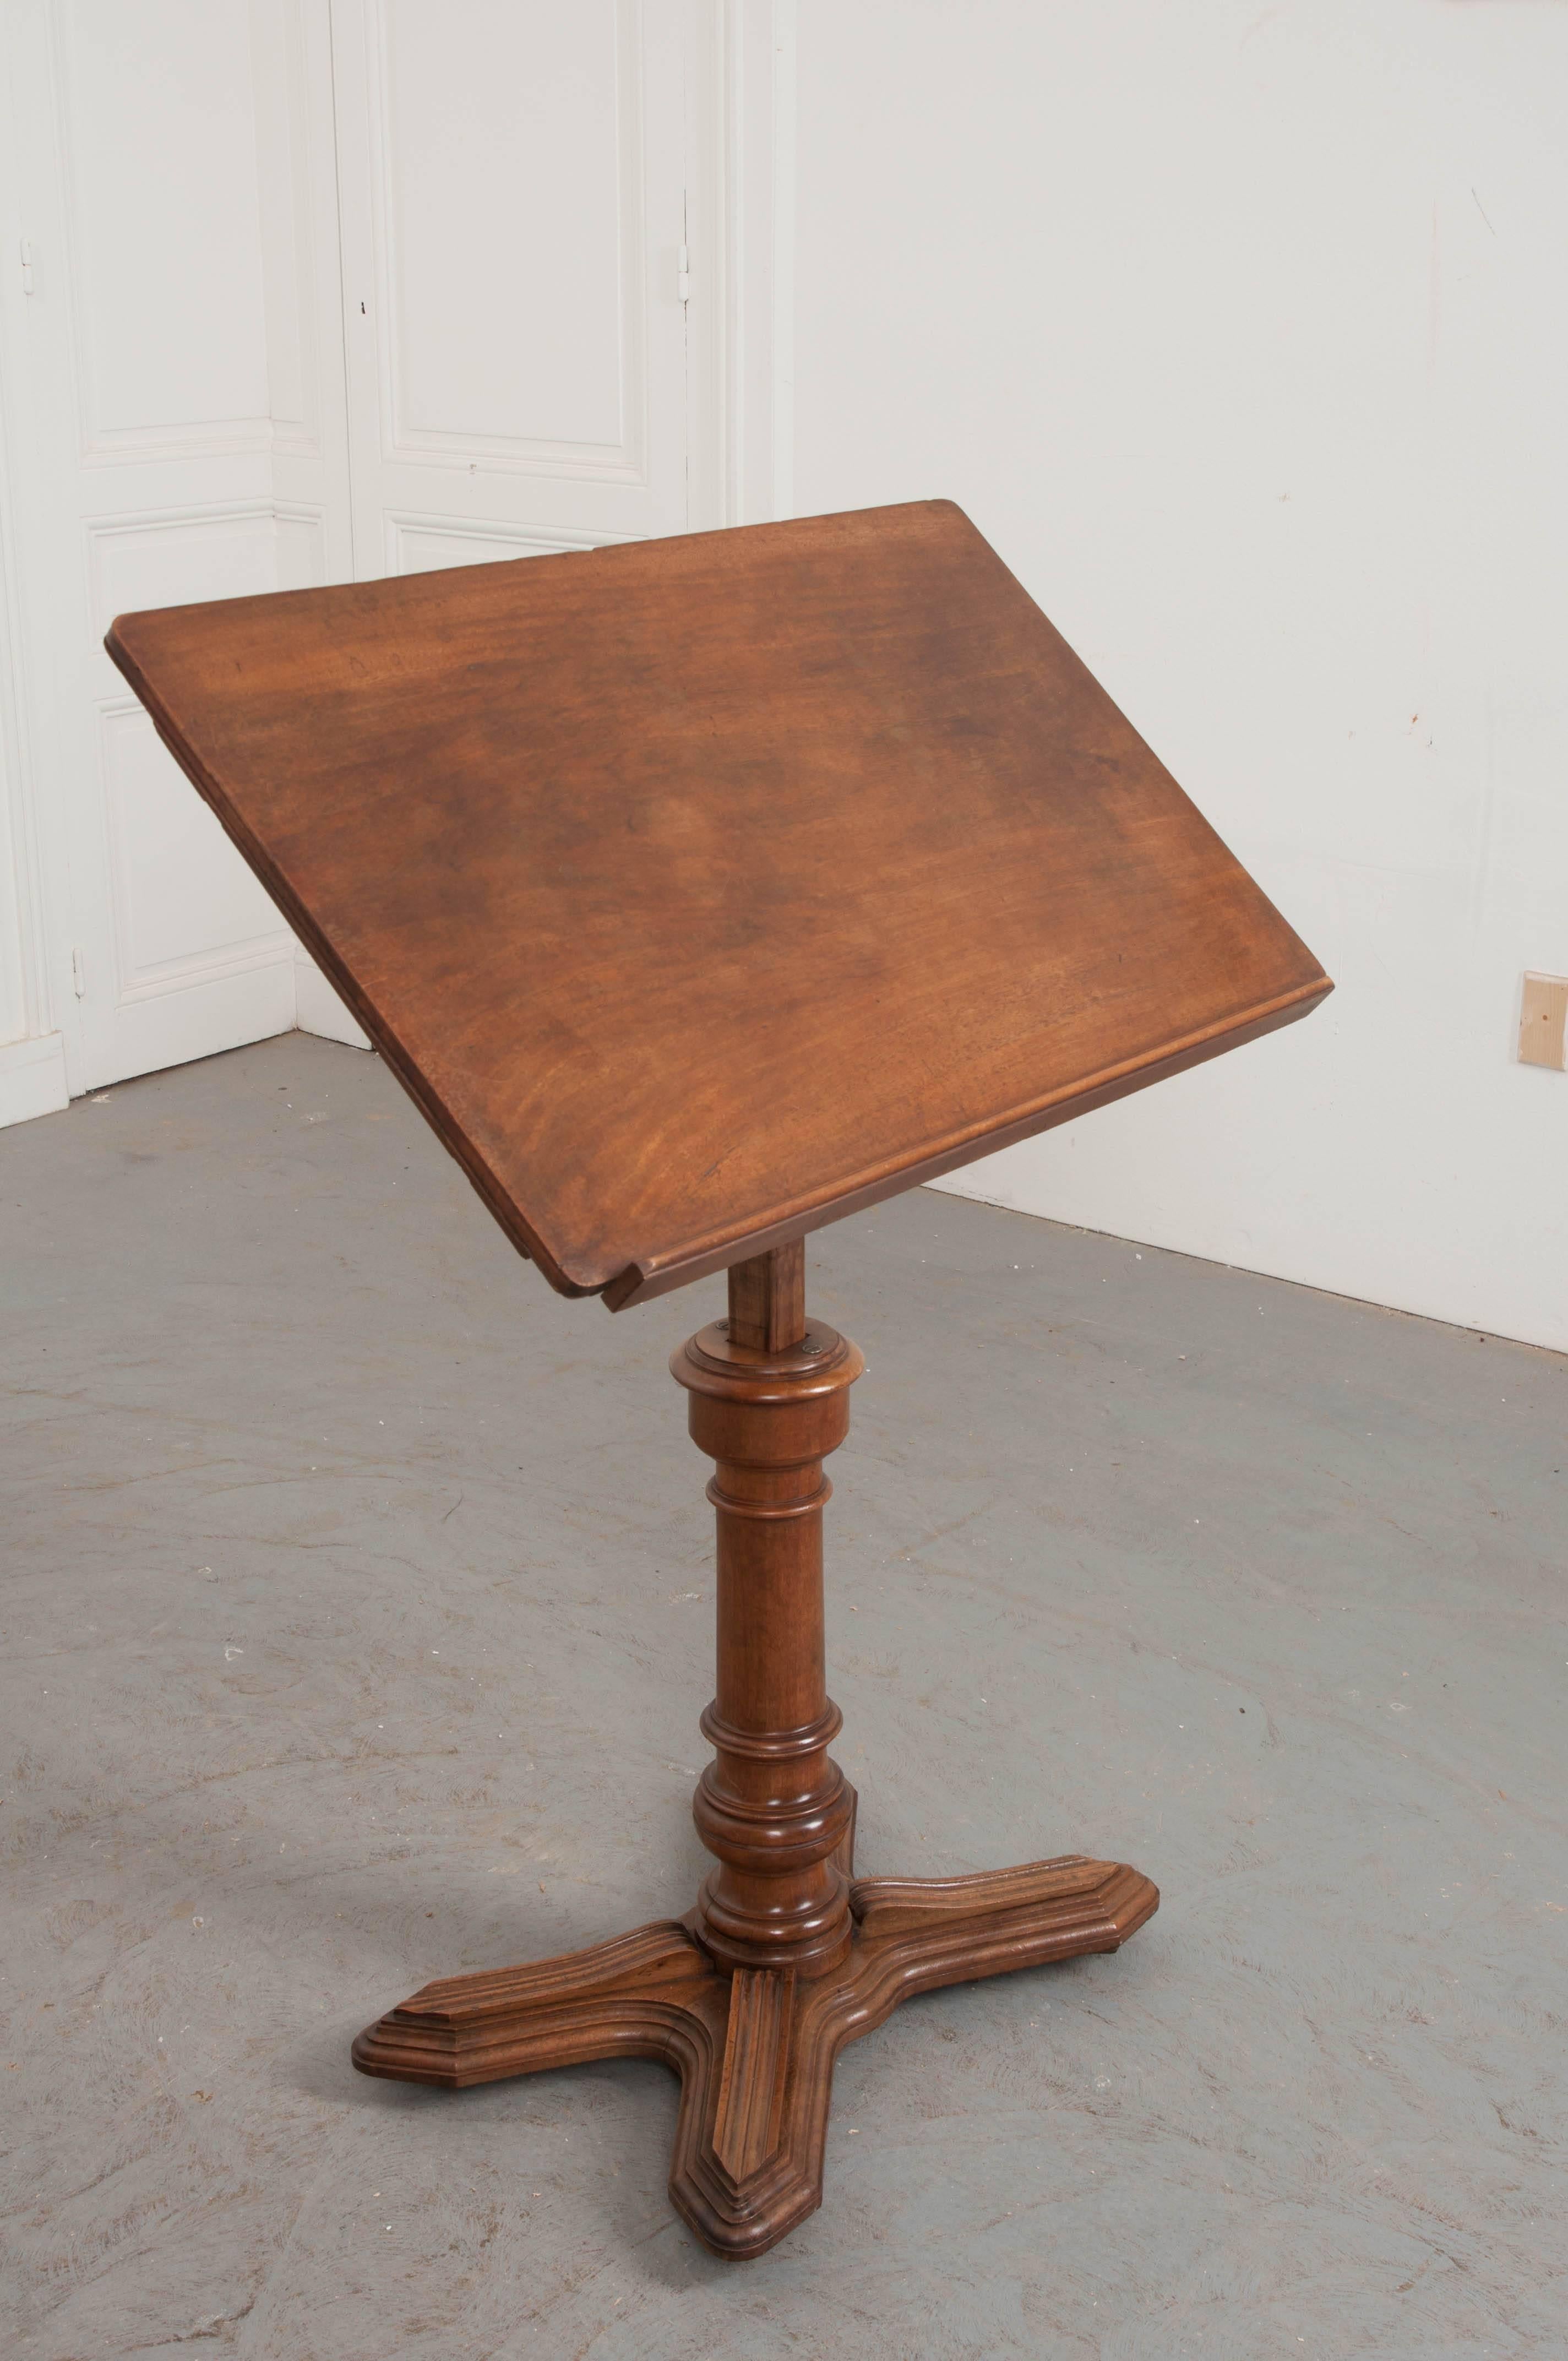 A dapper, stately mahogany podium or lectern from 19th century France. This fully-adjustable stand has been constructed using beautiful solid mahogany. The large top surface measures 20 1/4? H x 35? W. Its pitch can be adjusted to suit the users’